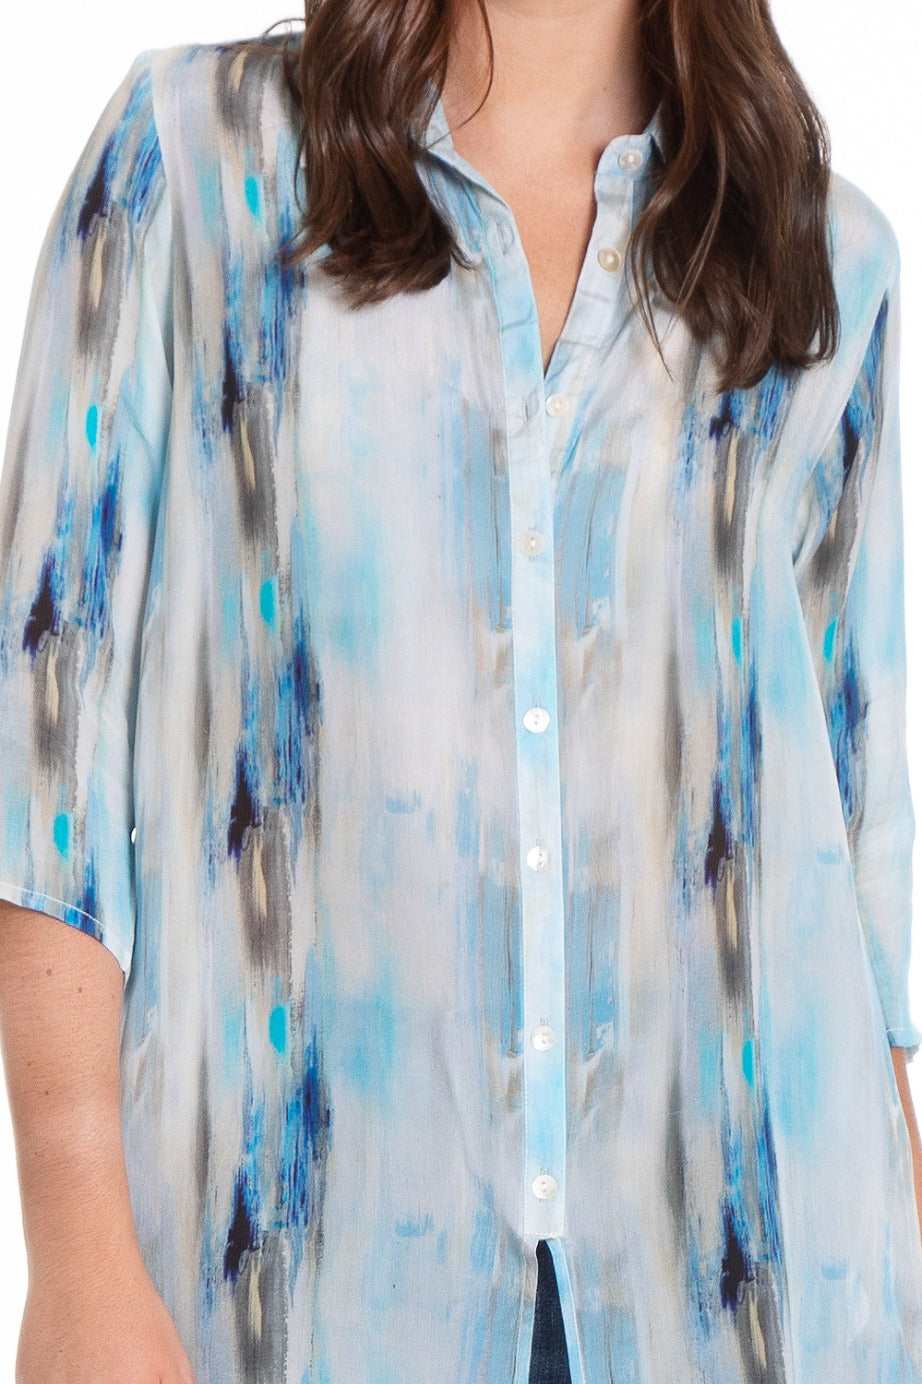 Painterly Strokes - 3⁄4 Sleeve Button-Up with Side Slits Neck APNY